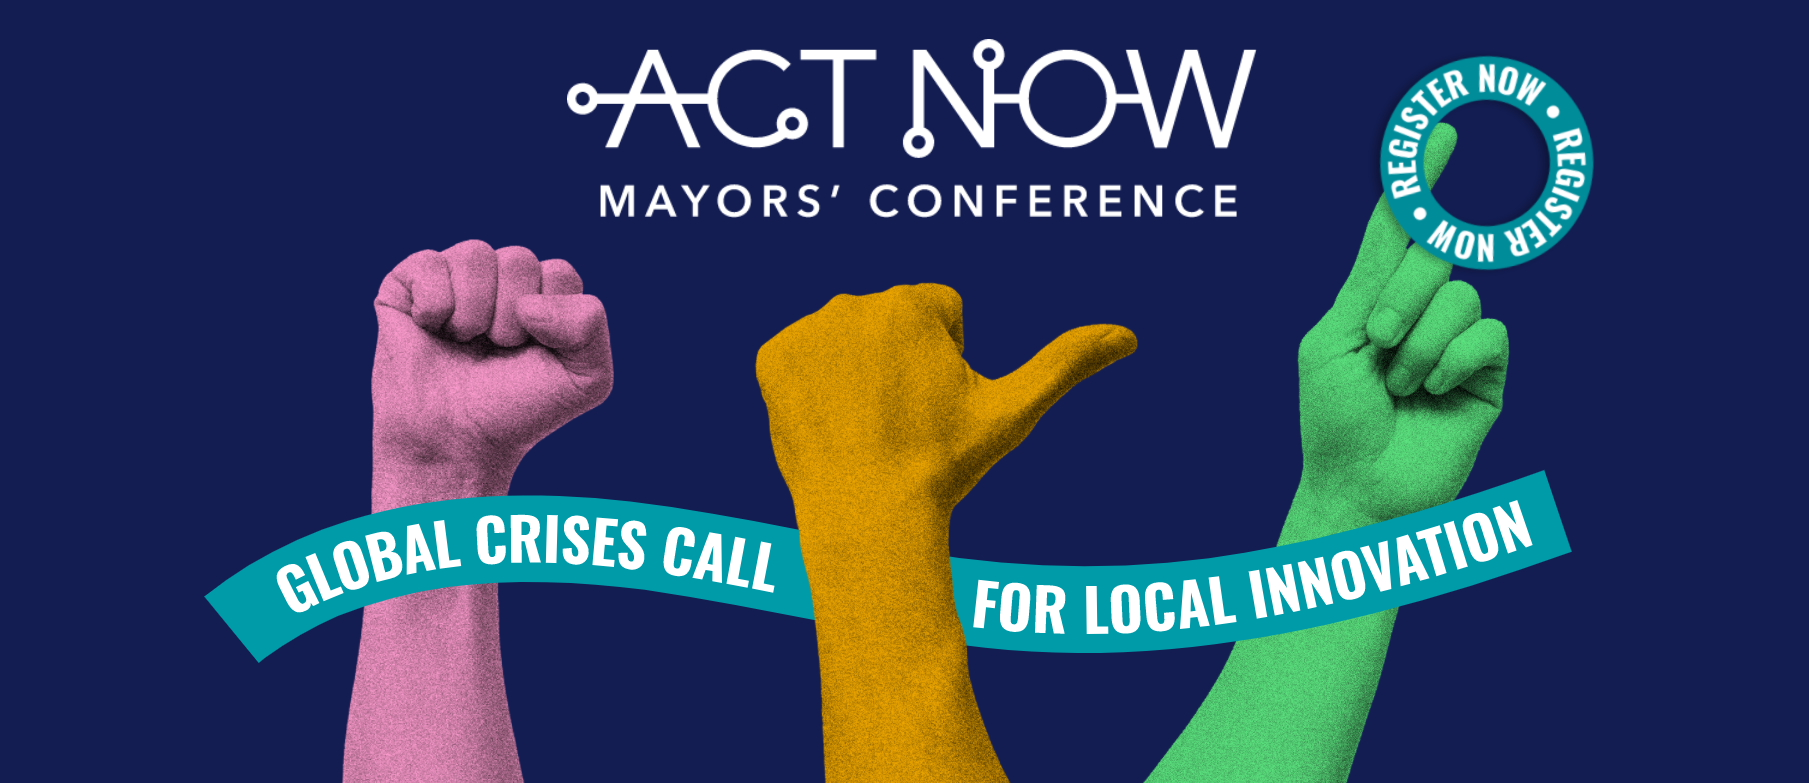 Act Now Mayors' Conference: Training